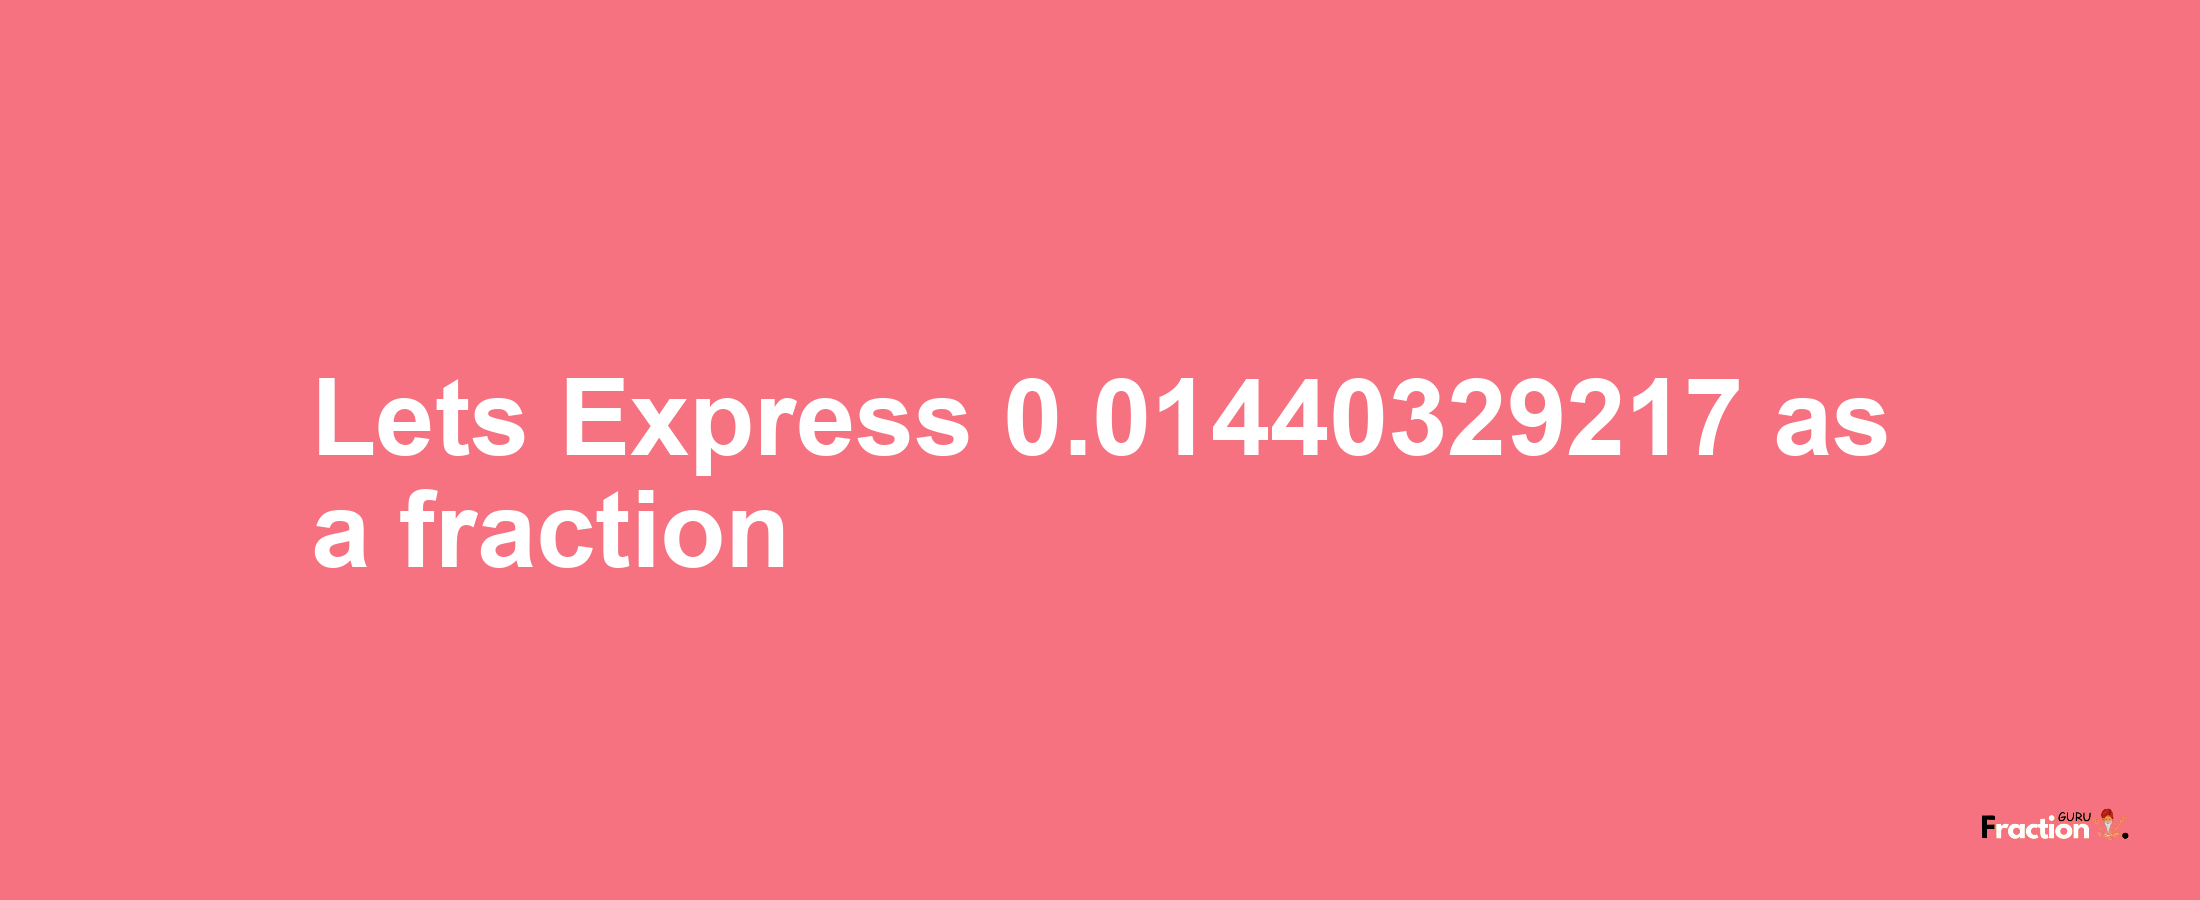 Lets Express 0.01440329217 as afraction